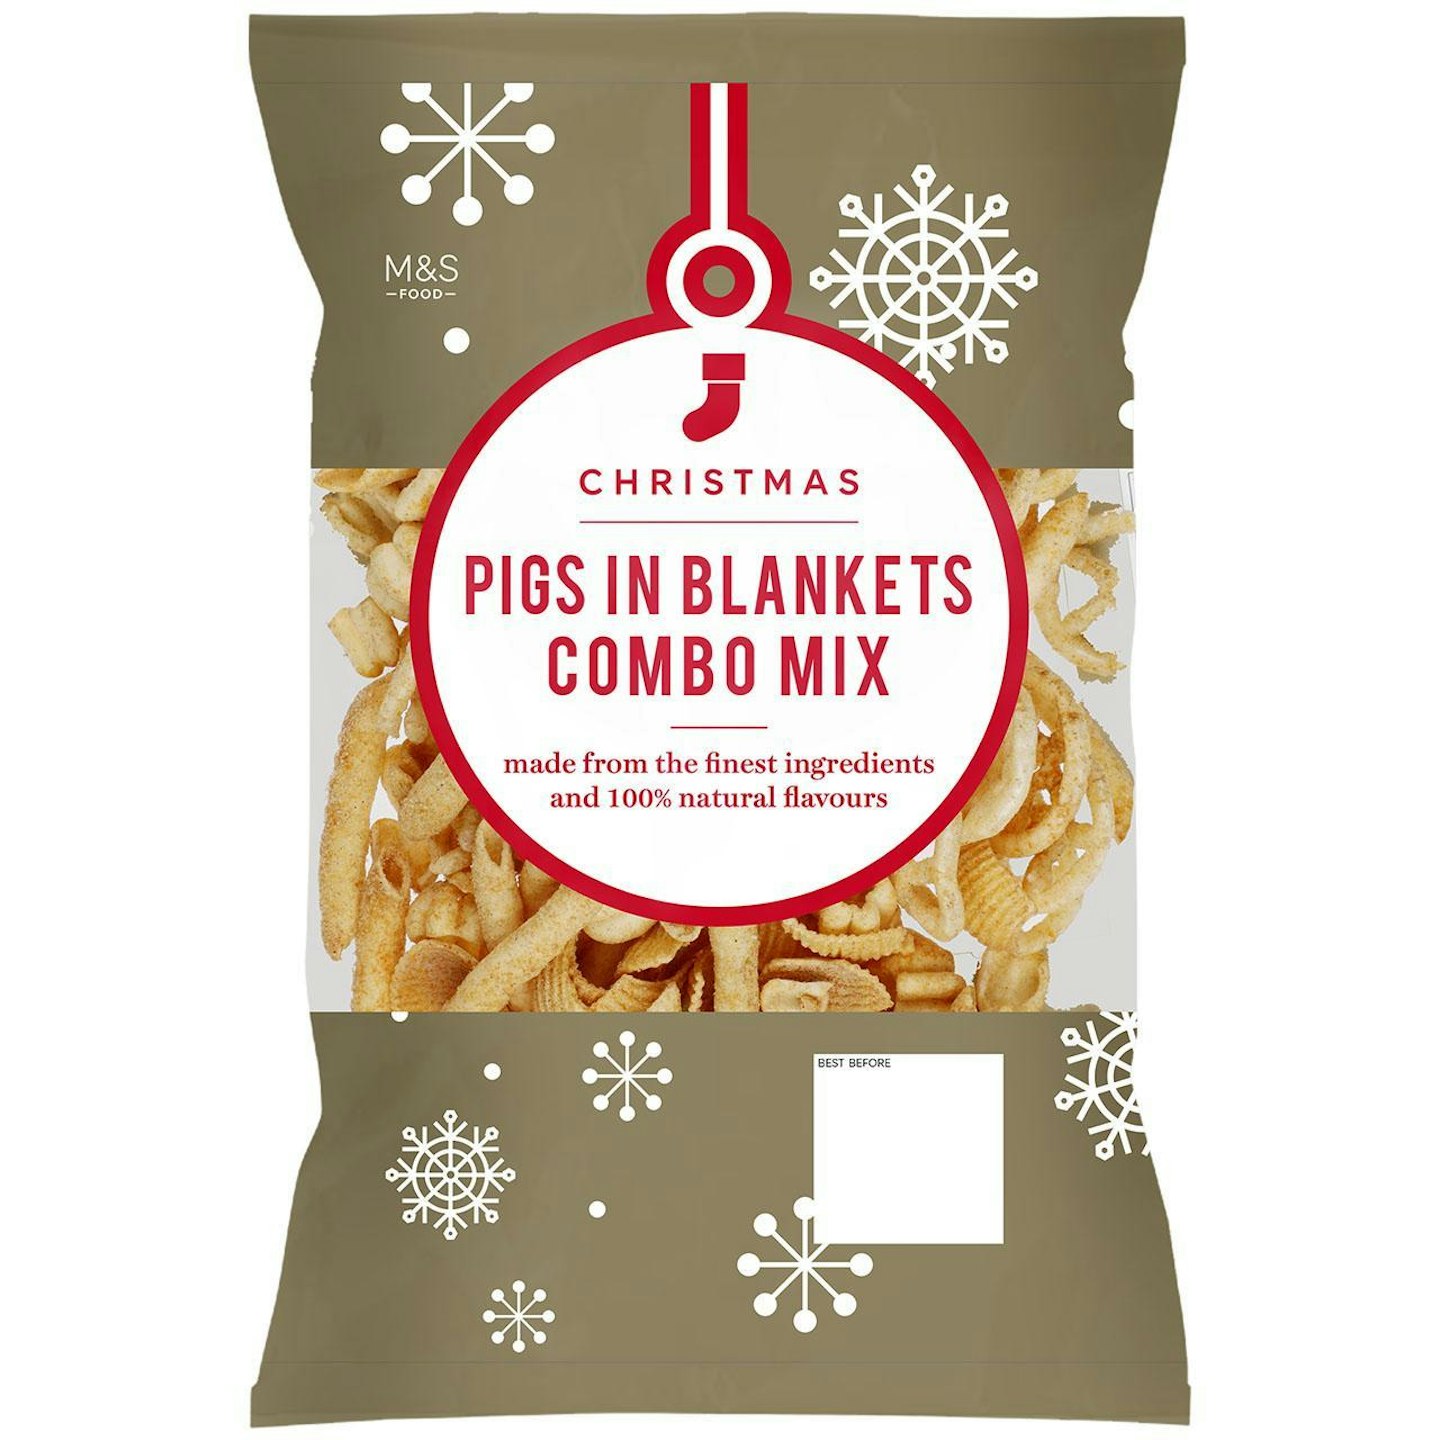 M&S Christmas Pigs in Blankets Snack Combo Mix, £1.75